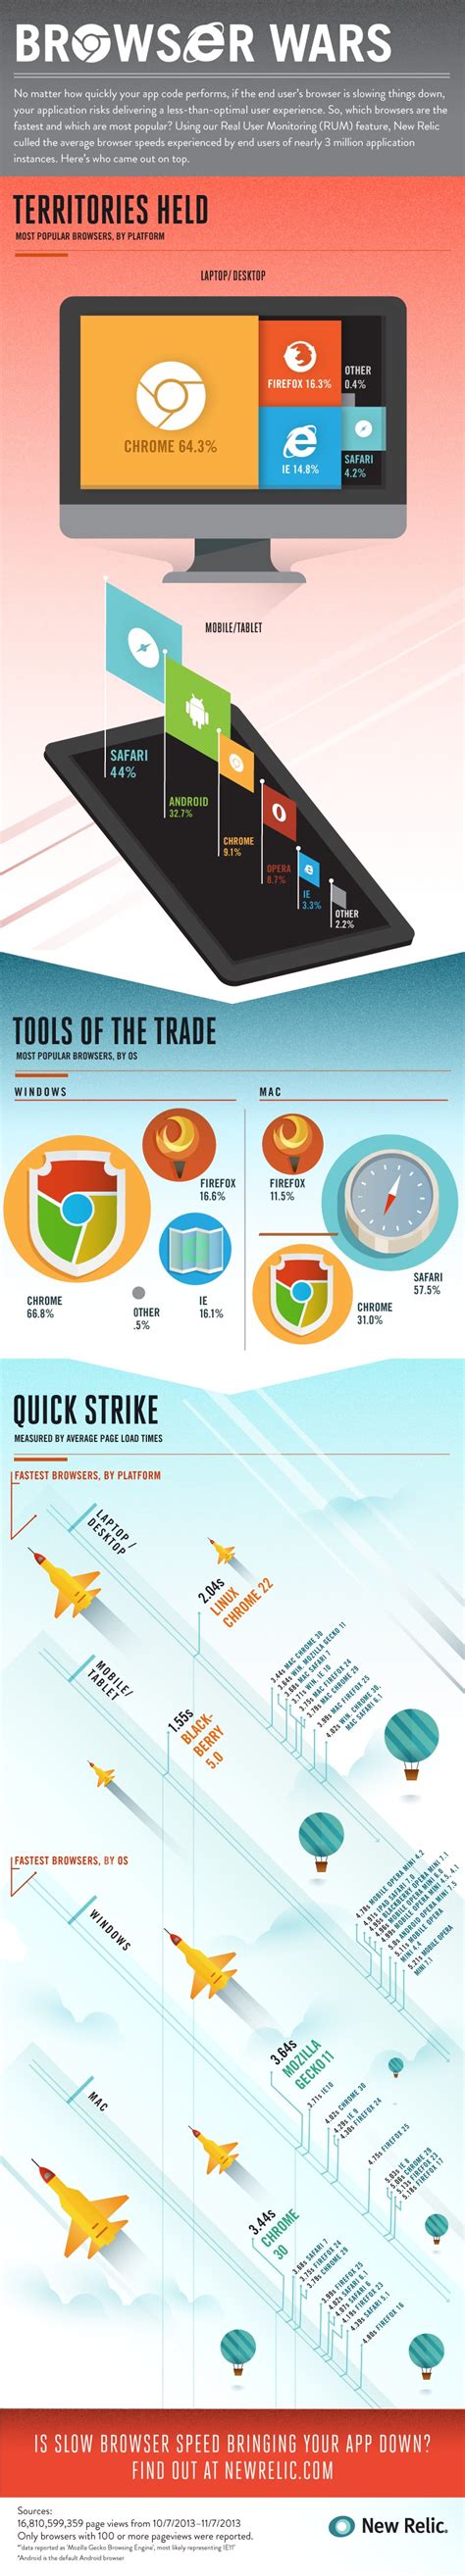 Browser Wars Infographic Social Media Advice Social Media Trends Social Media Business Web